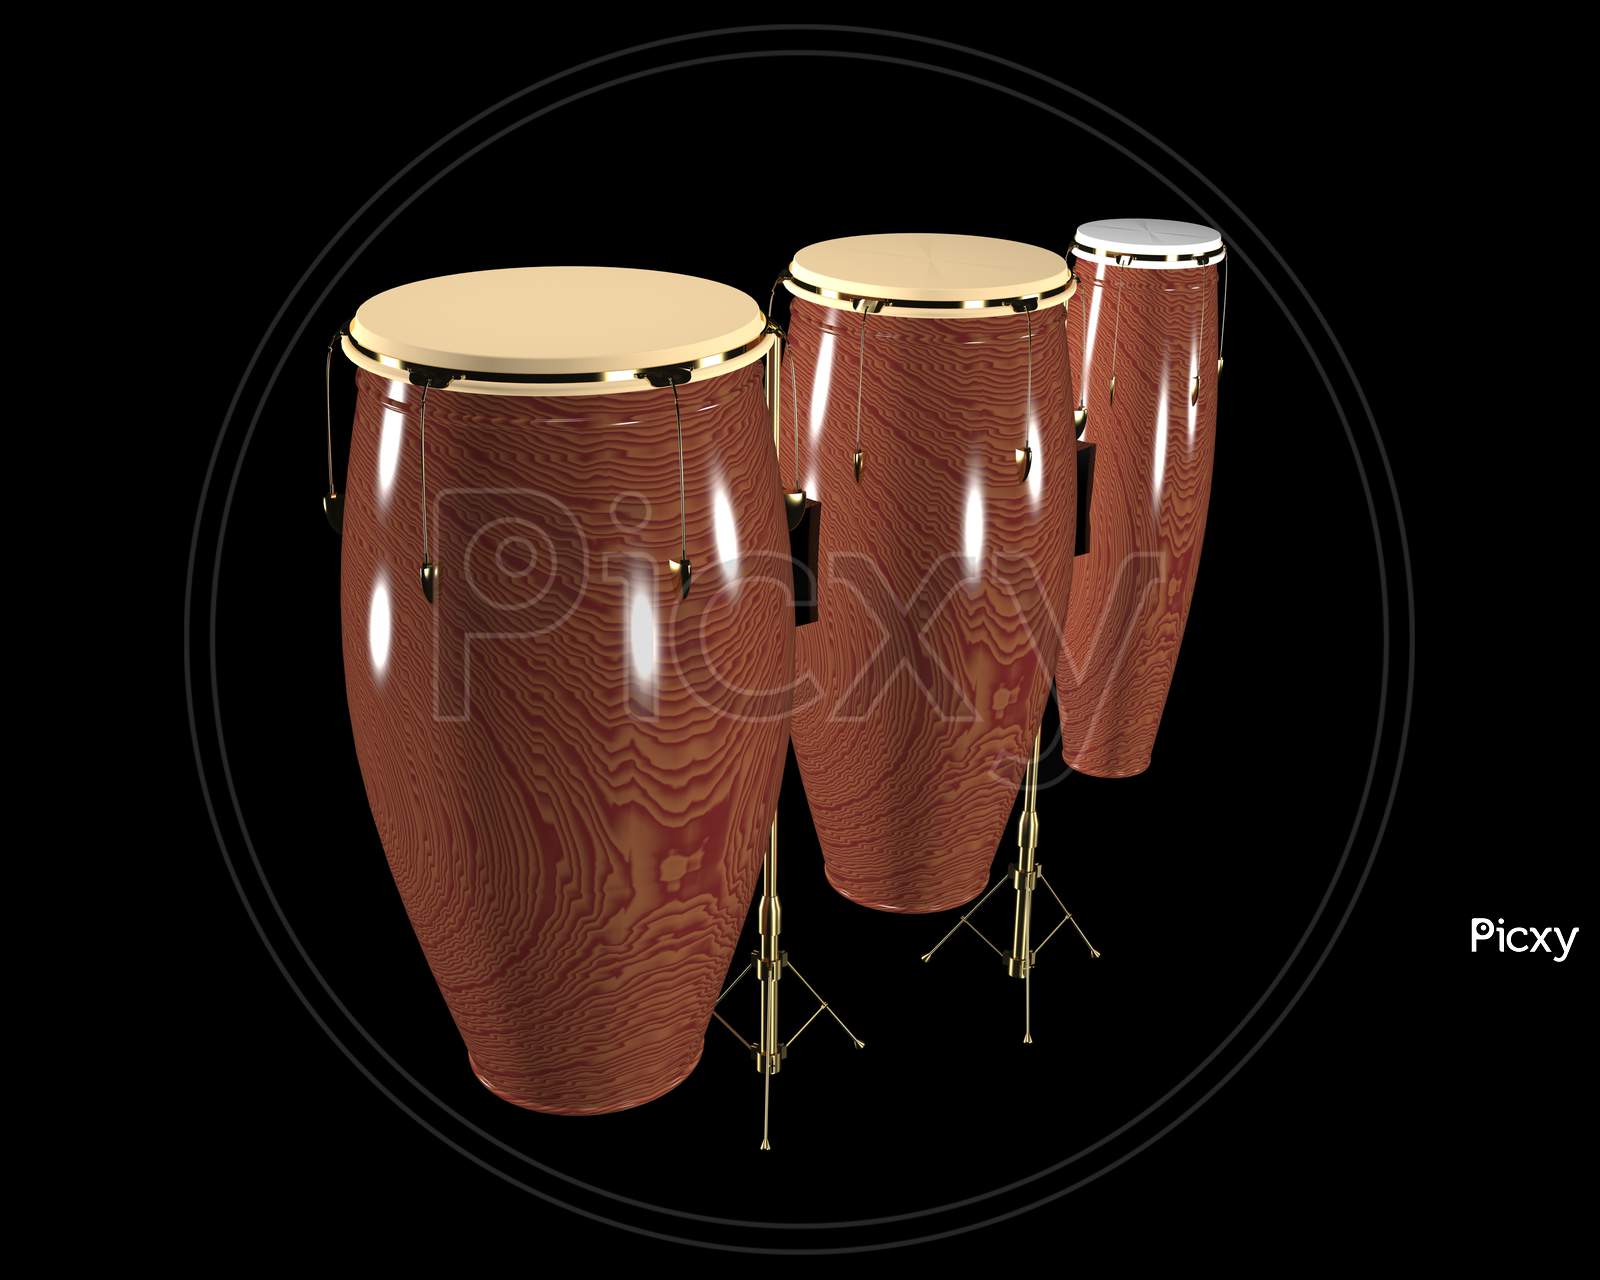 The Conga is the middle size and is traditionally used to play middle drum parts